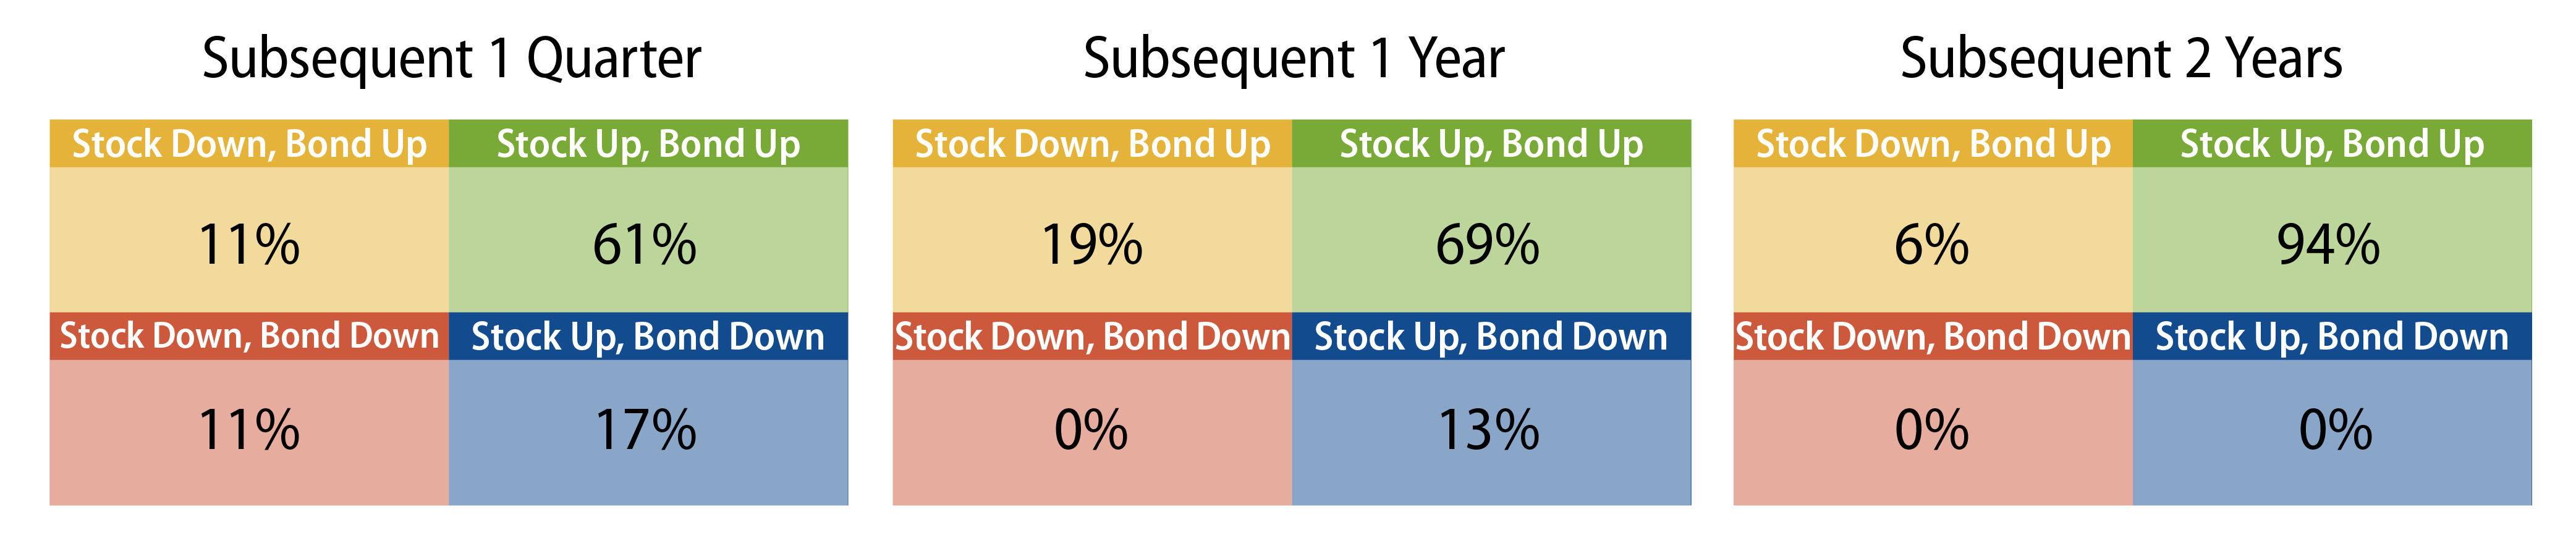 Historical Frequency of Stock/Bond Movements After Quarters When They Moved Lower Together